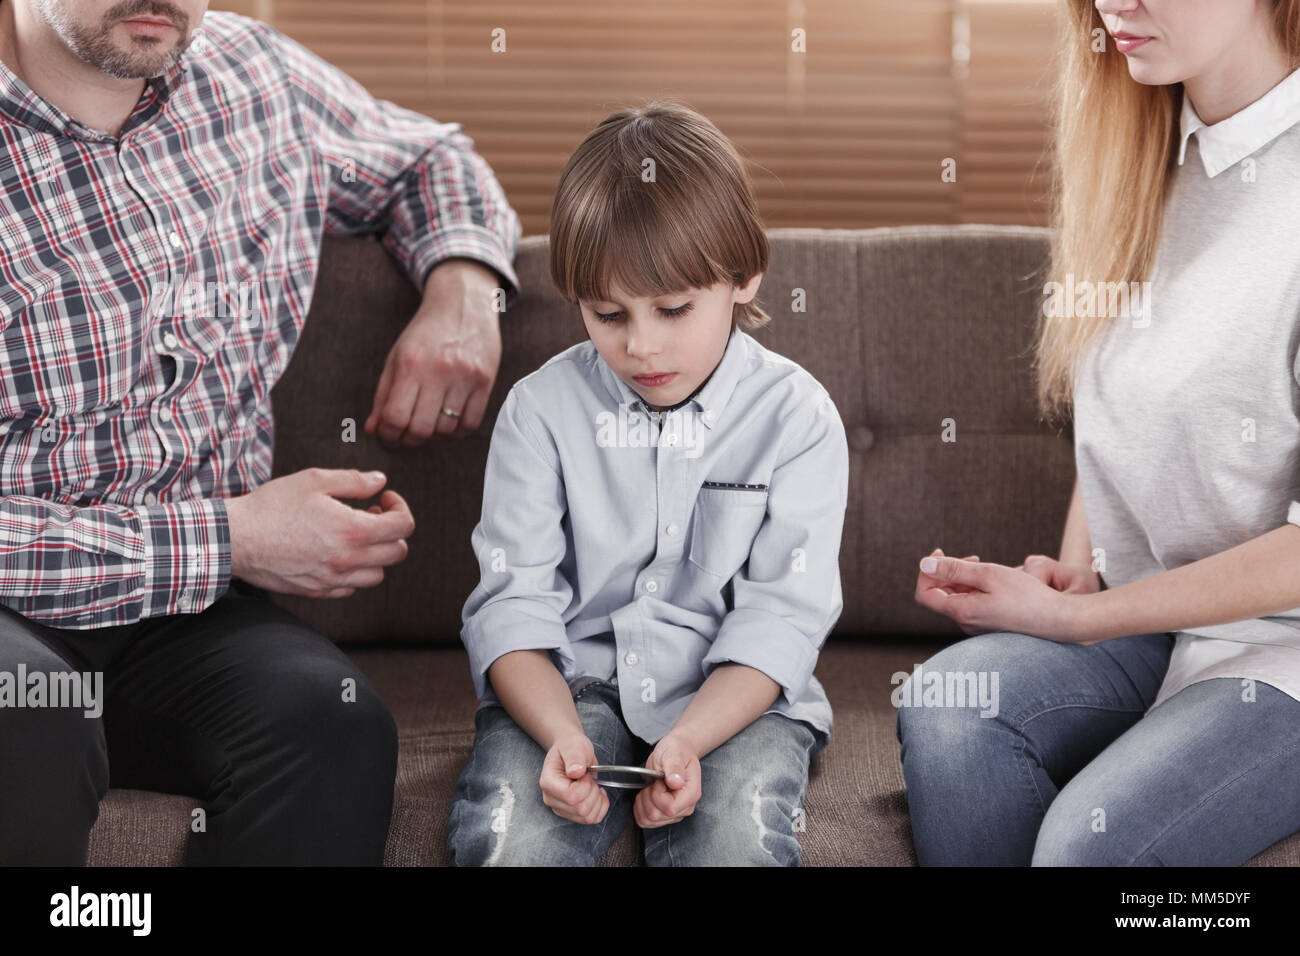 Close-up of sad boy with autism sitting between worried mother and father Stock Photo